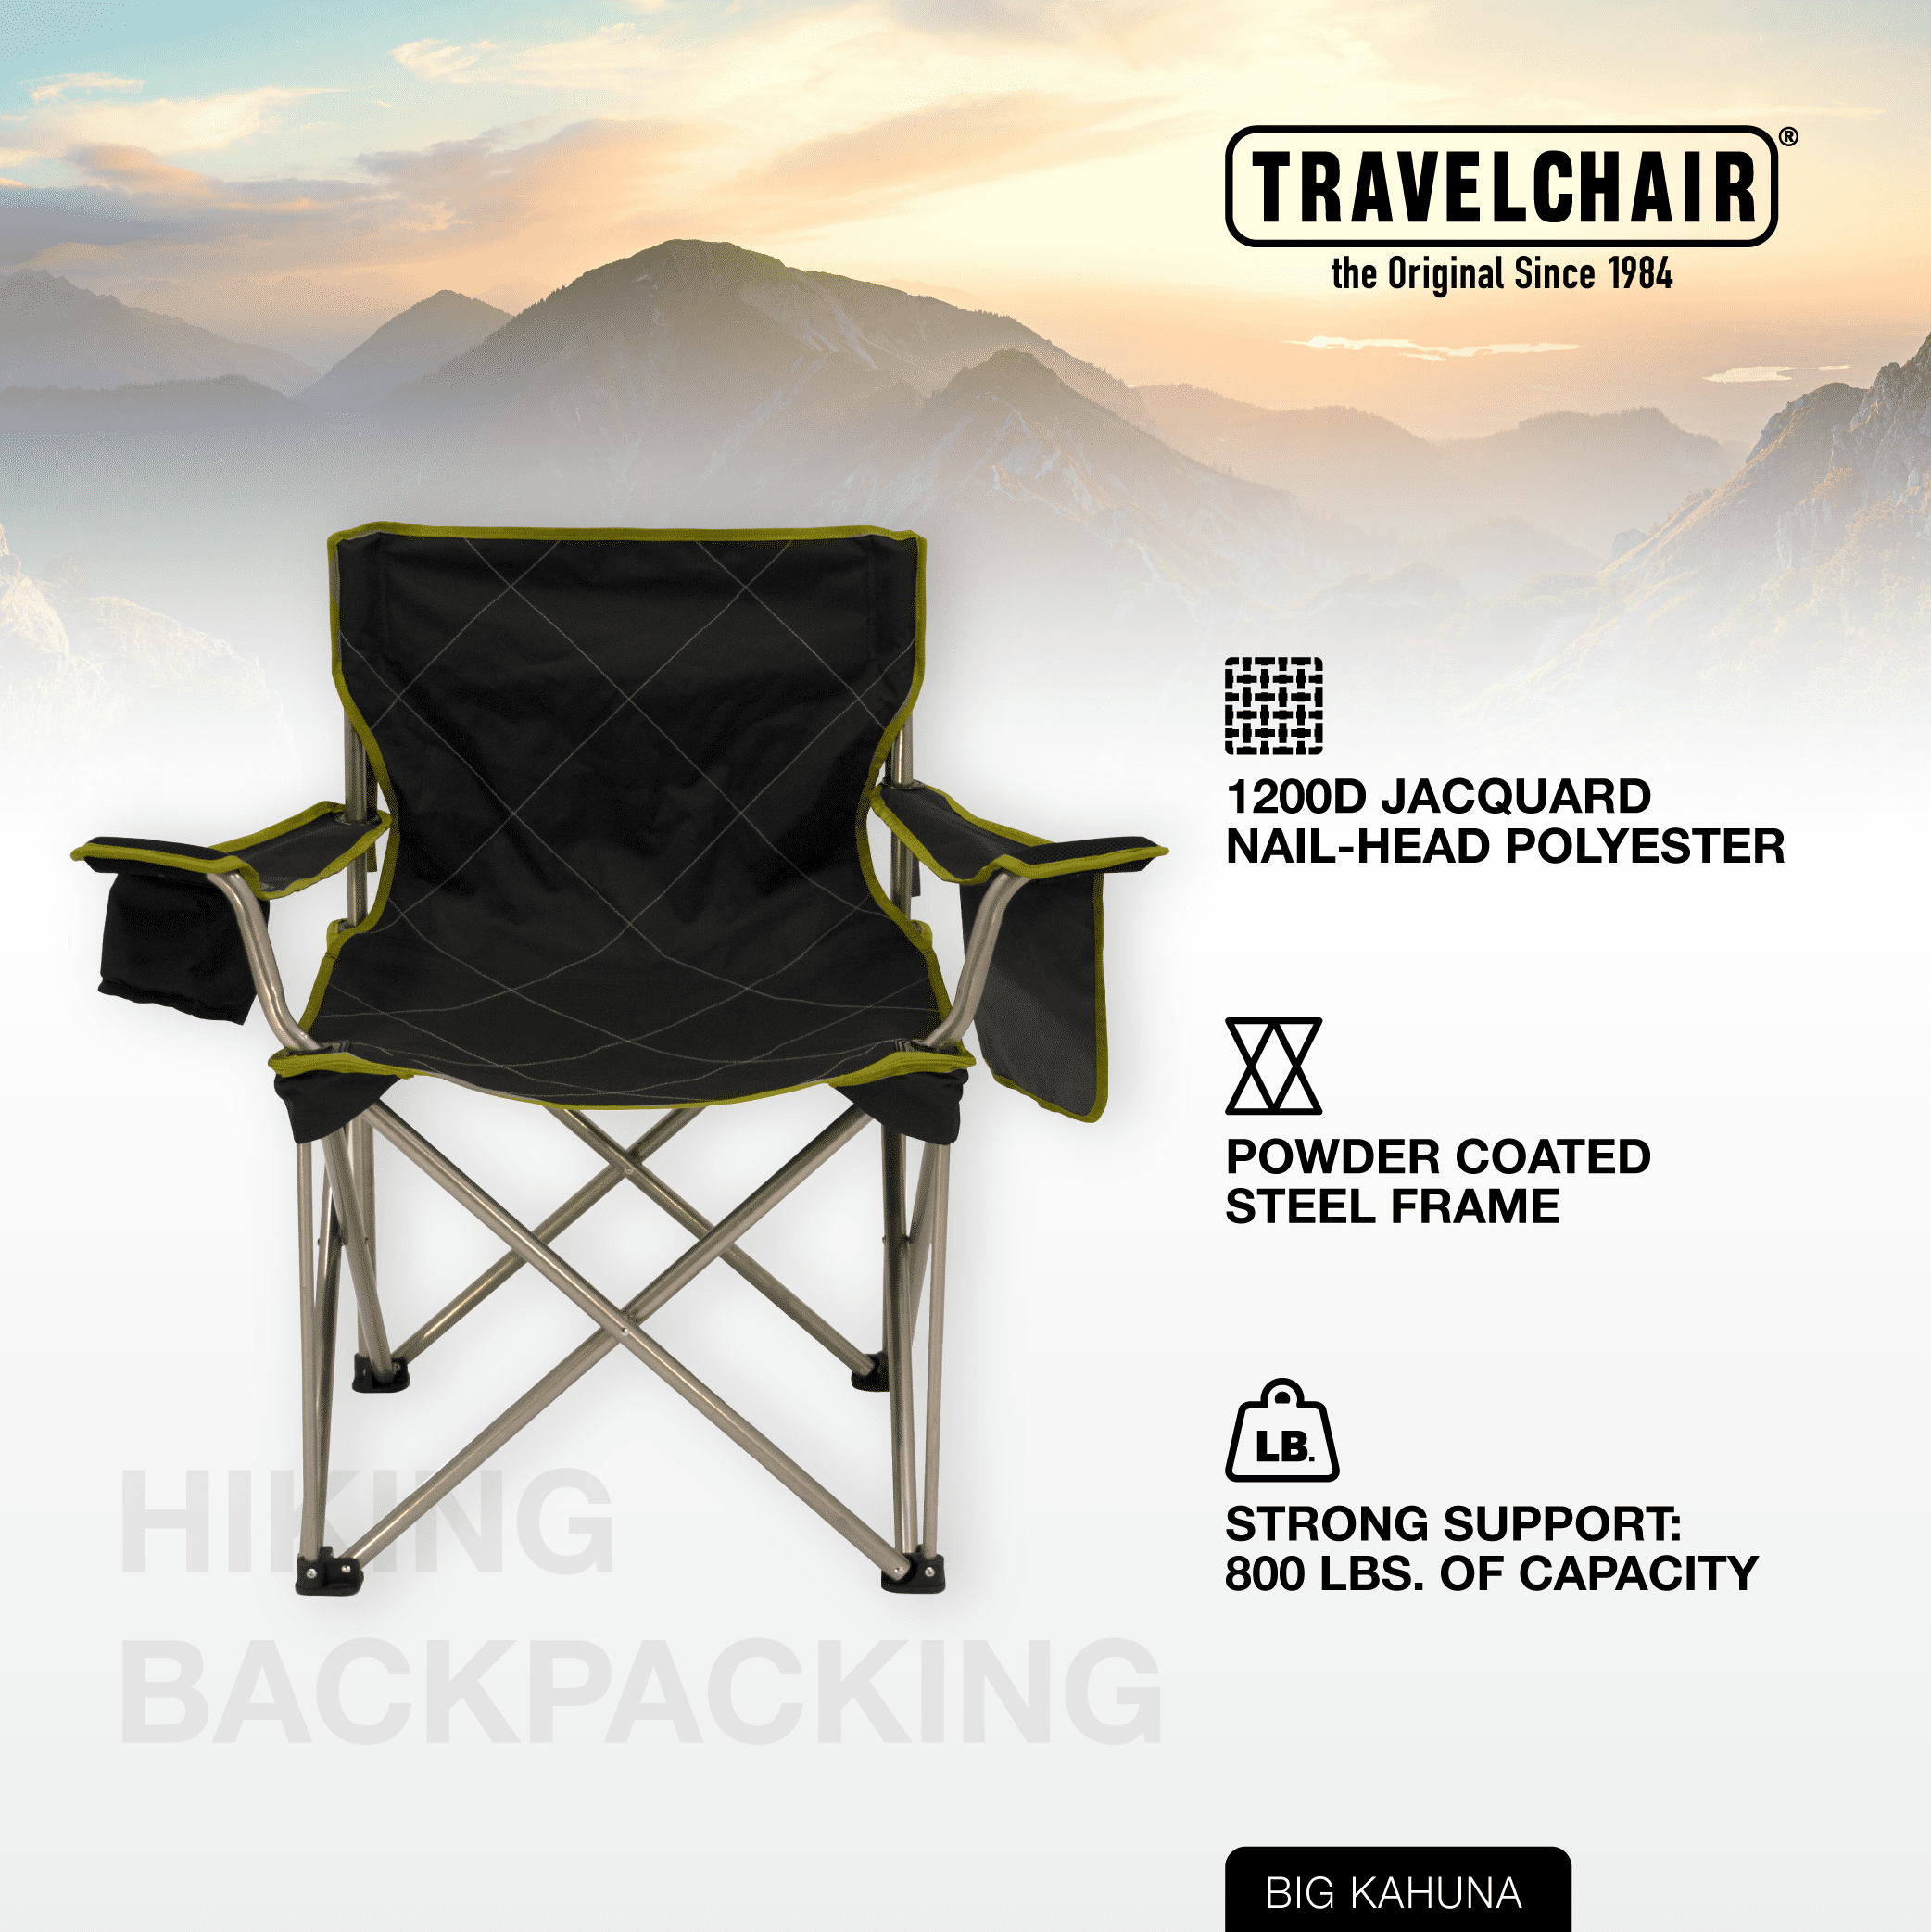 TravelChair Big Kahuna OVERSIZED SUPER STRONG CAMP CHAIR OUTDOOR PORTABLE 